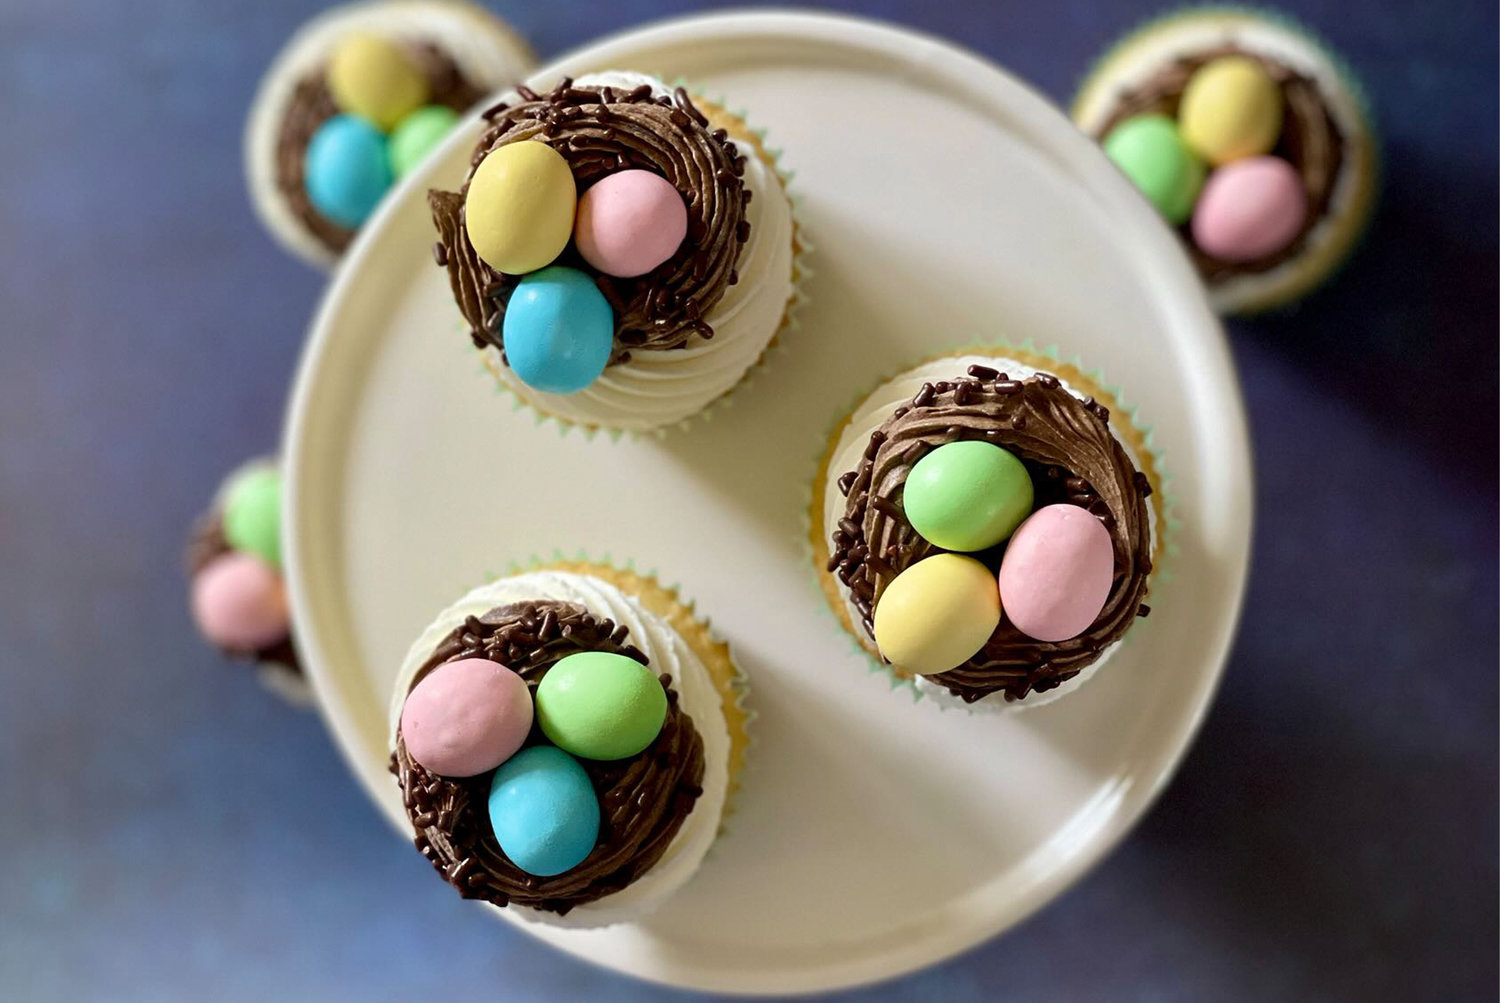 Poore Man Bakery crafts spring cupcakes topped with petite nests